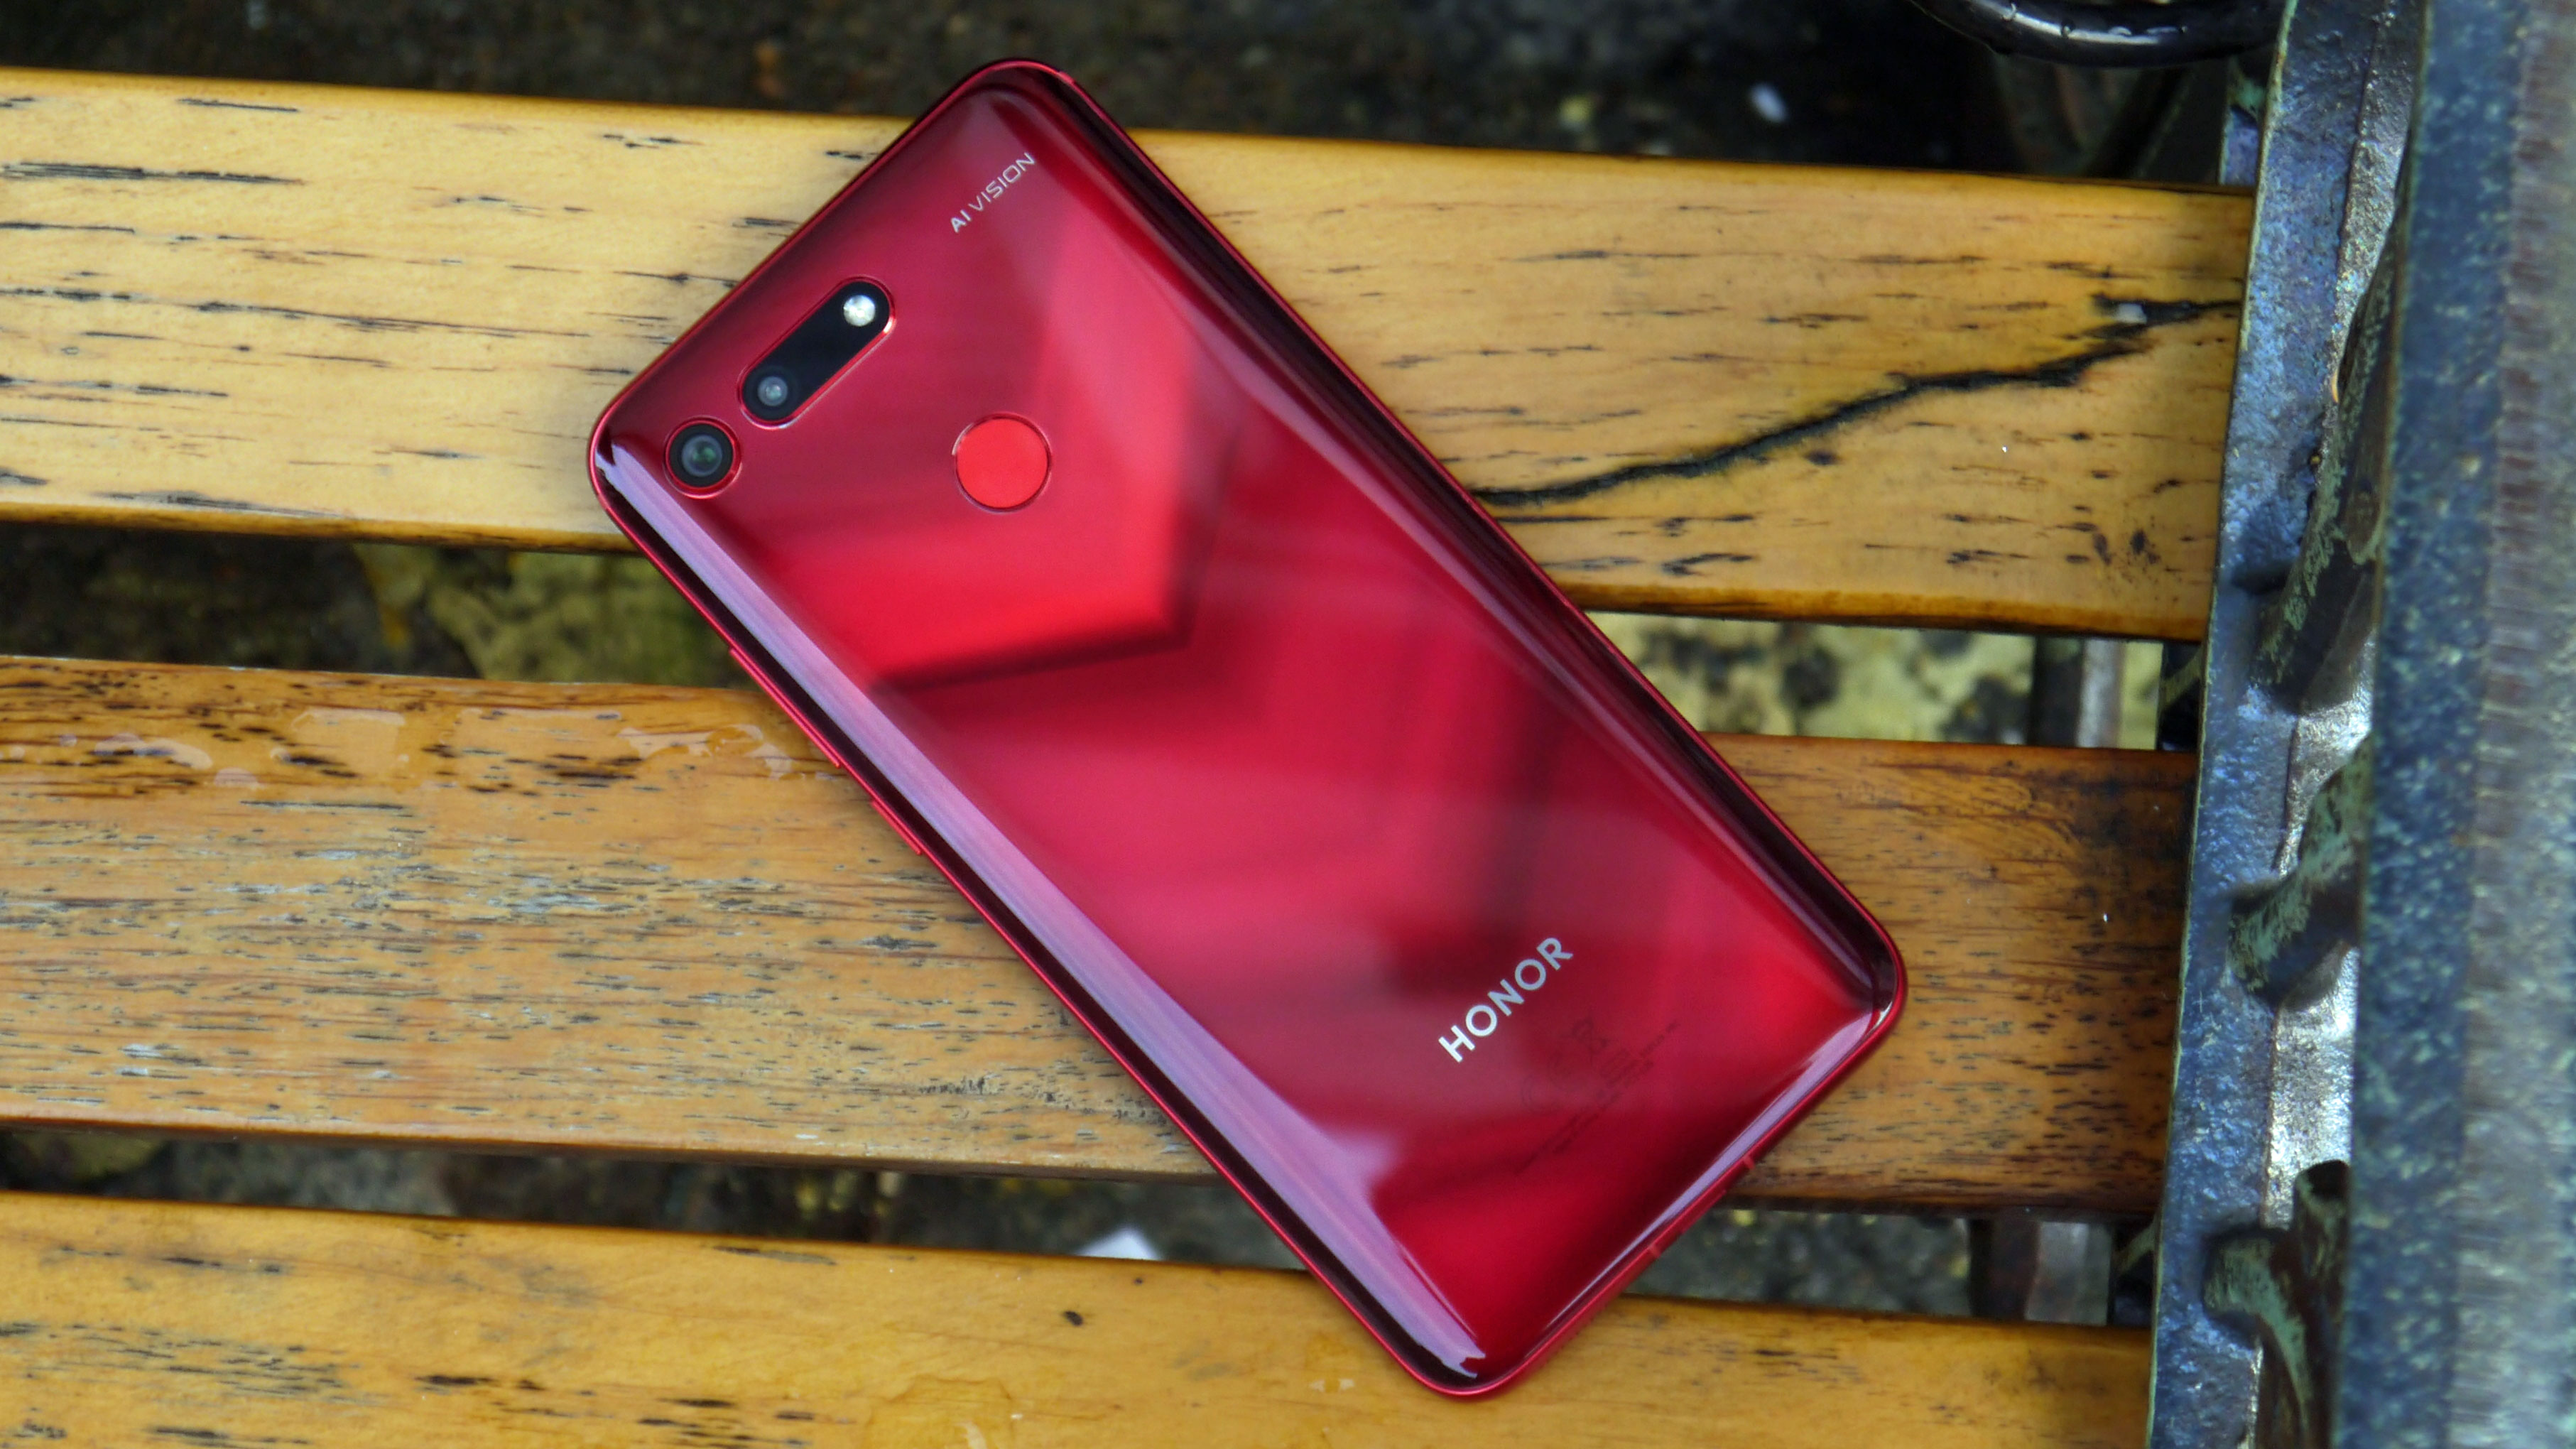 honor-view-20-india-price-leaked-ahead-on-janurary-29-launch-techradar